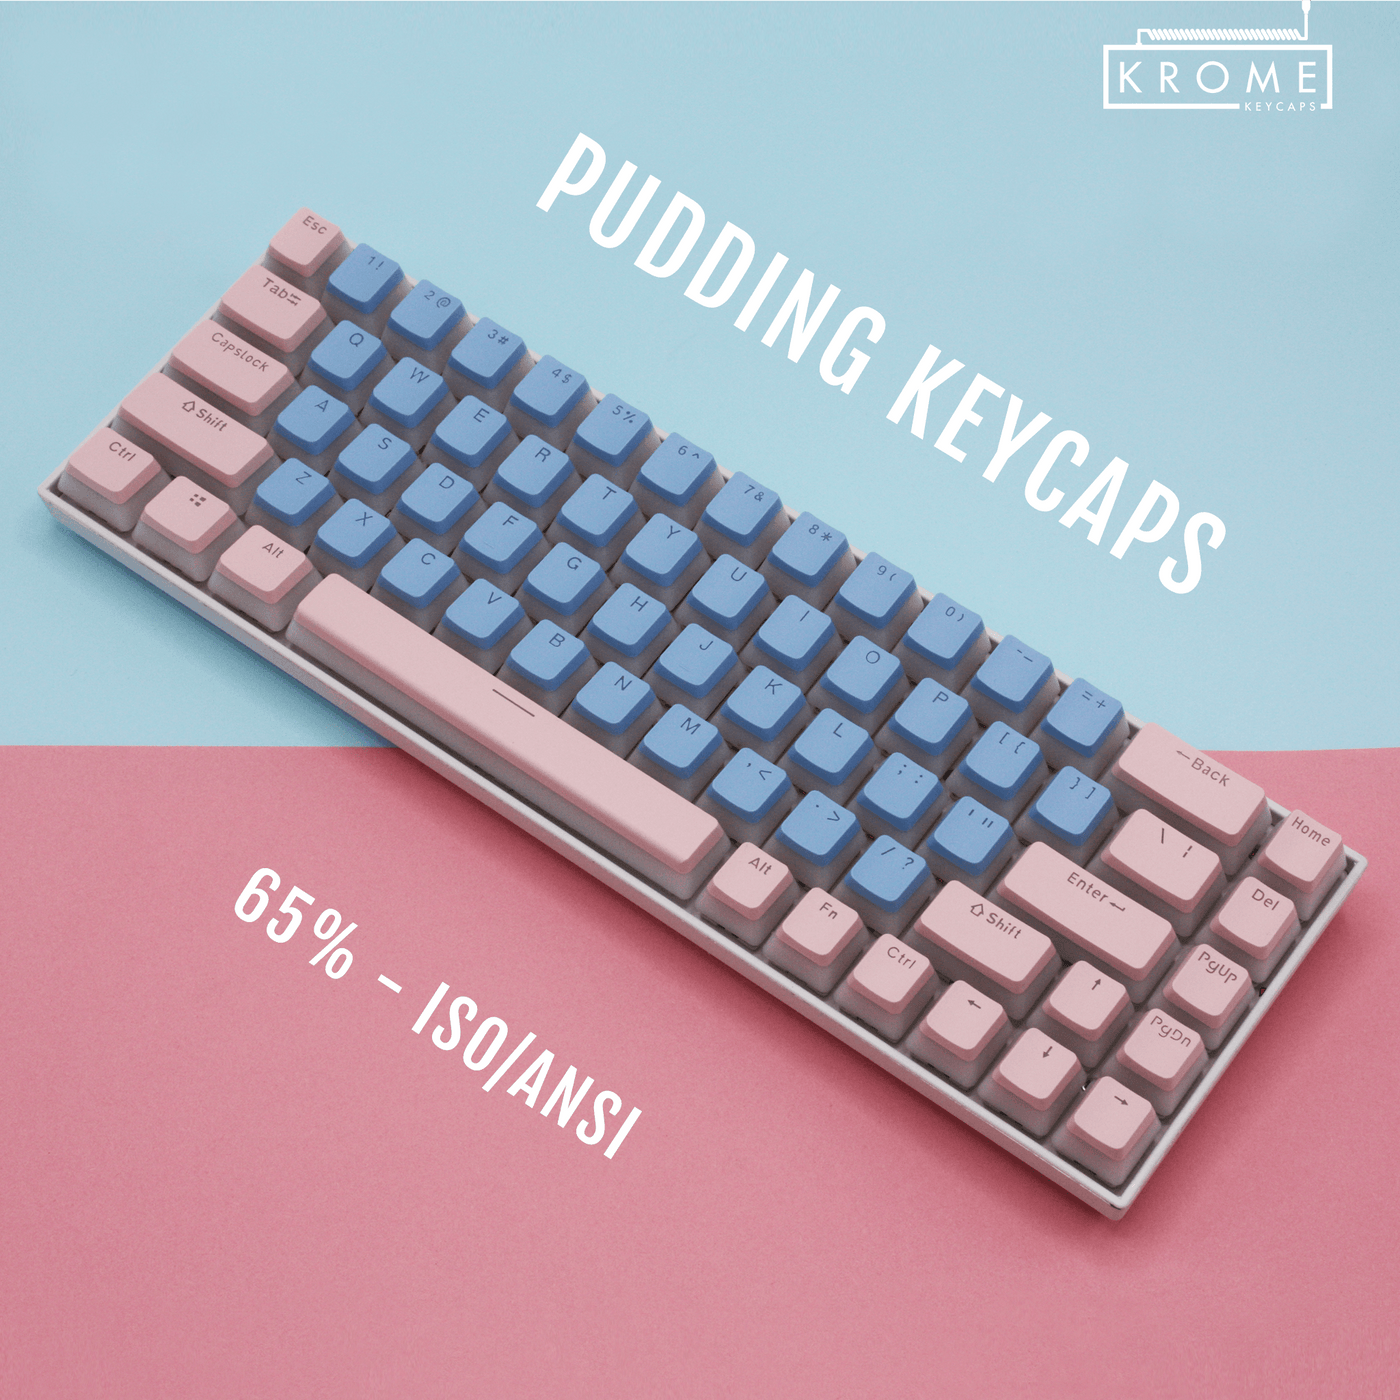 65% - ISO/ANSI - Create Your Own Pudding - Dual Colour Way